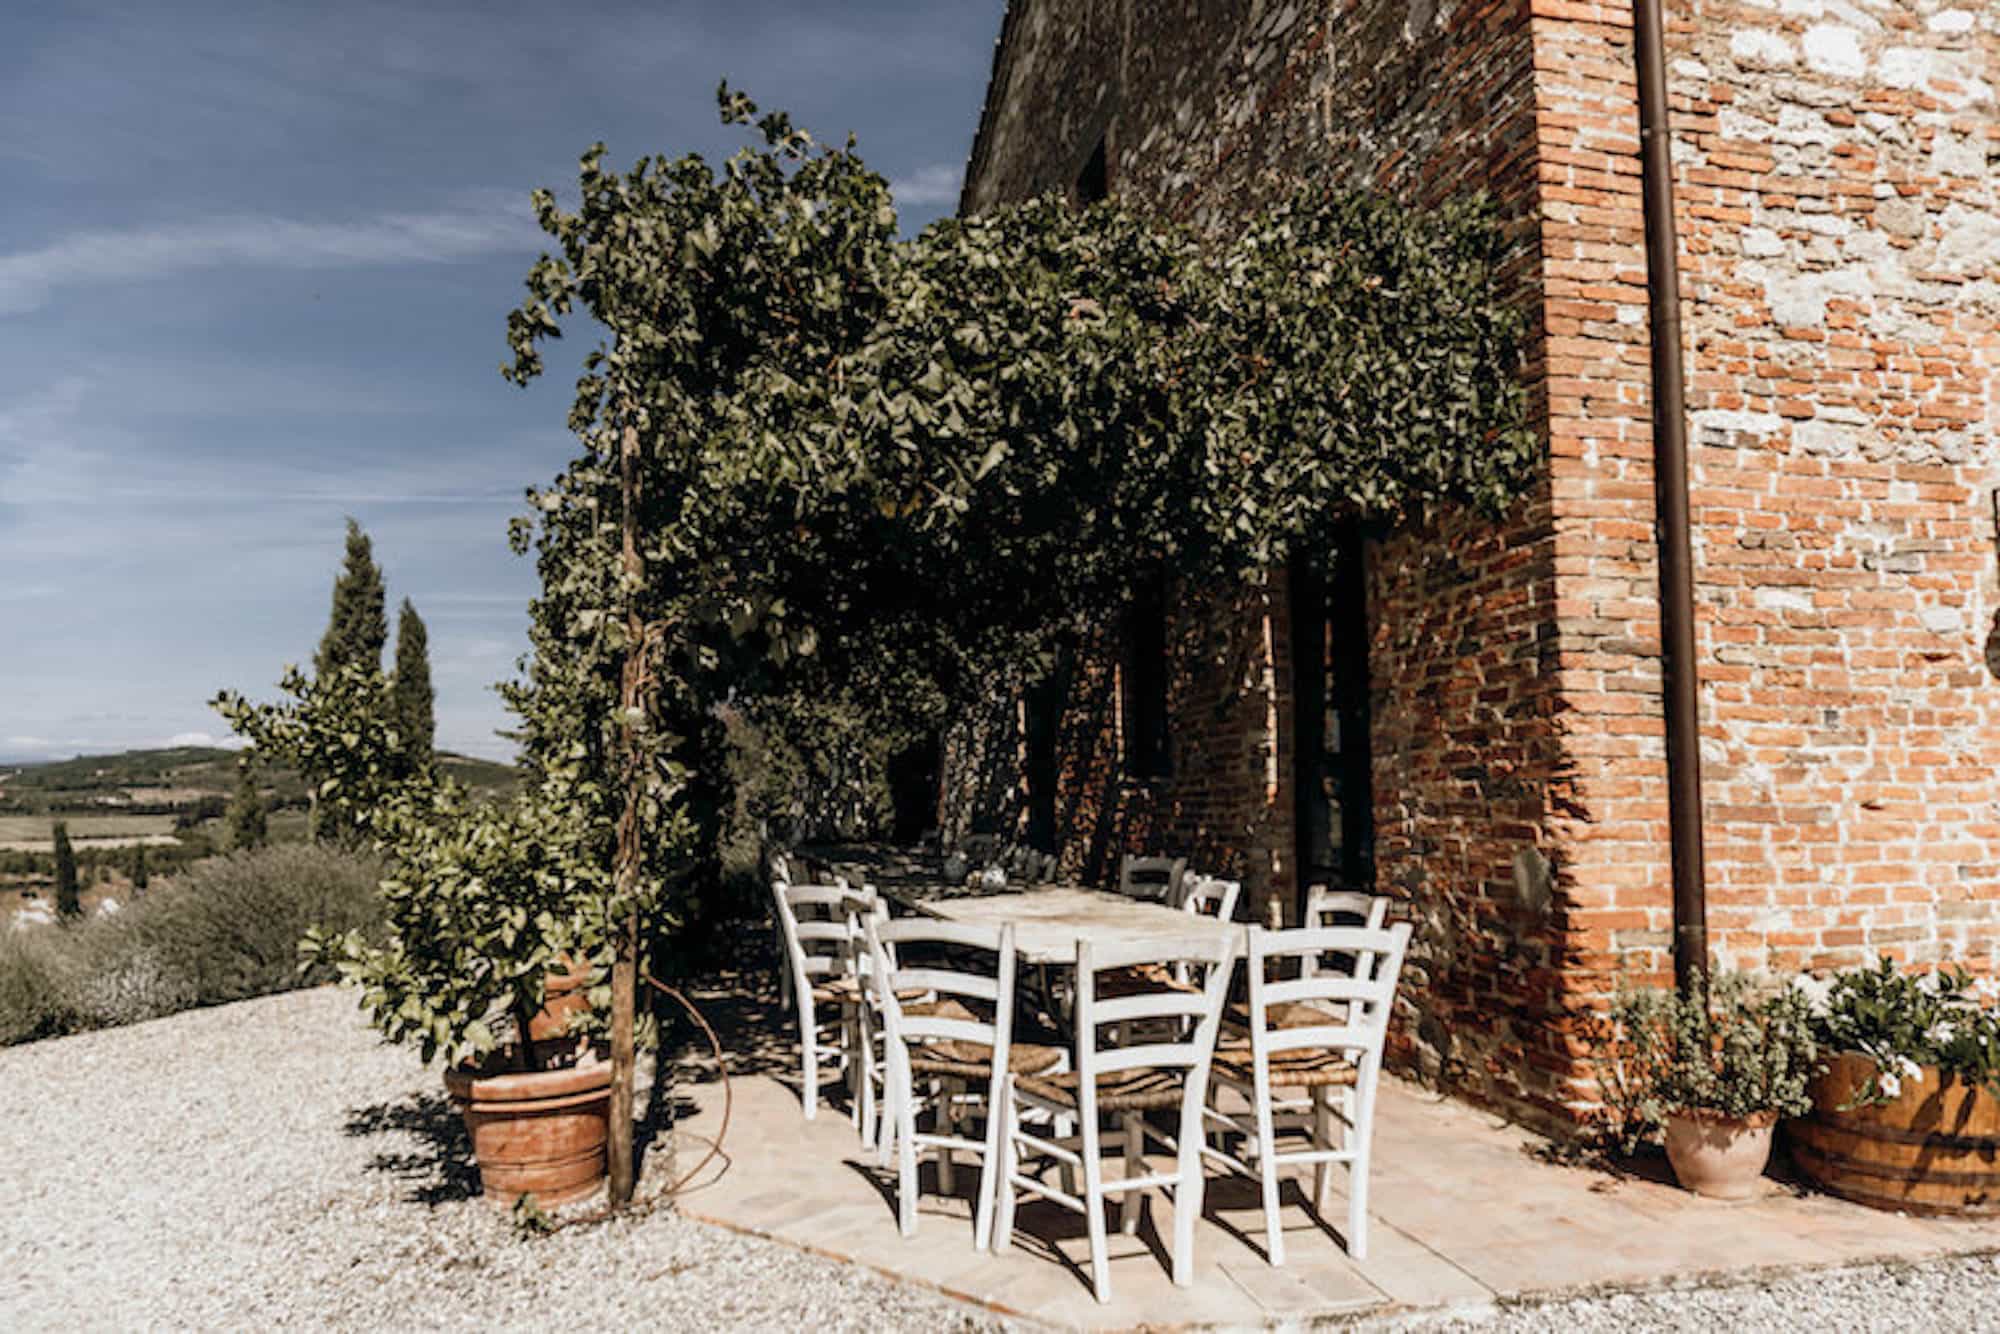 Tuscany Wedding Venues - A Guide for your Tuscany Elopement